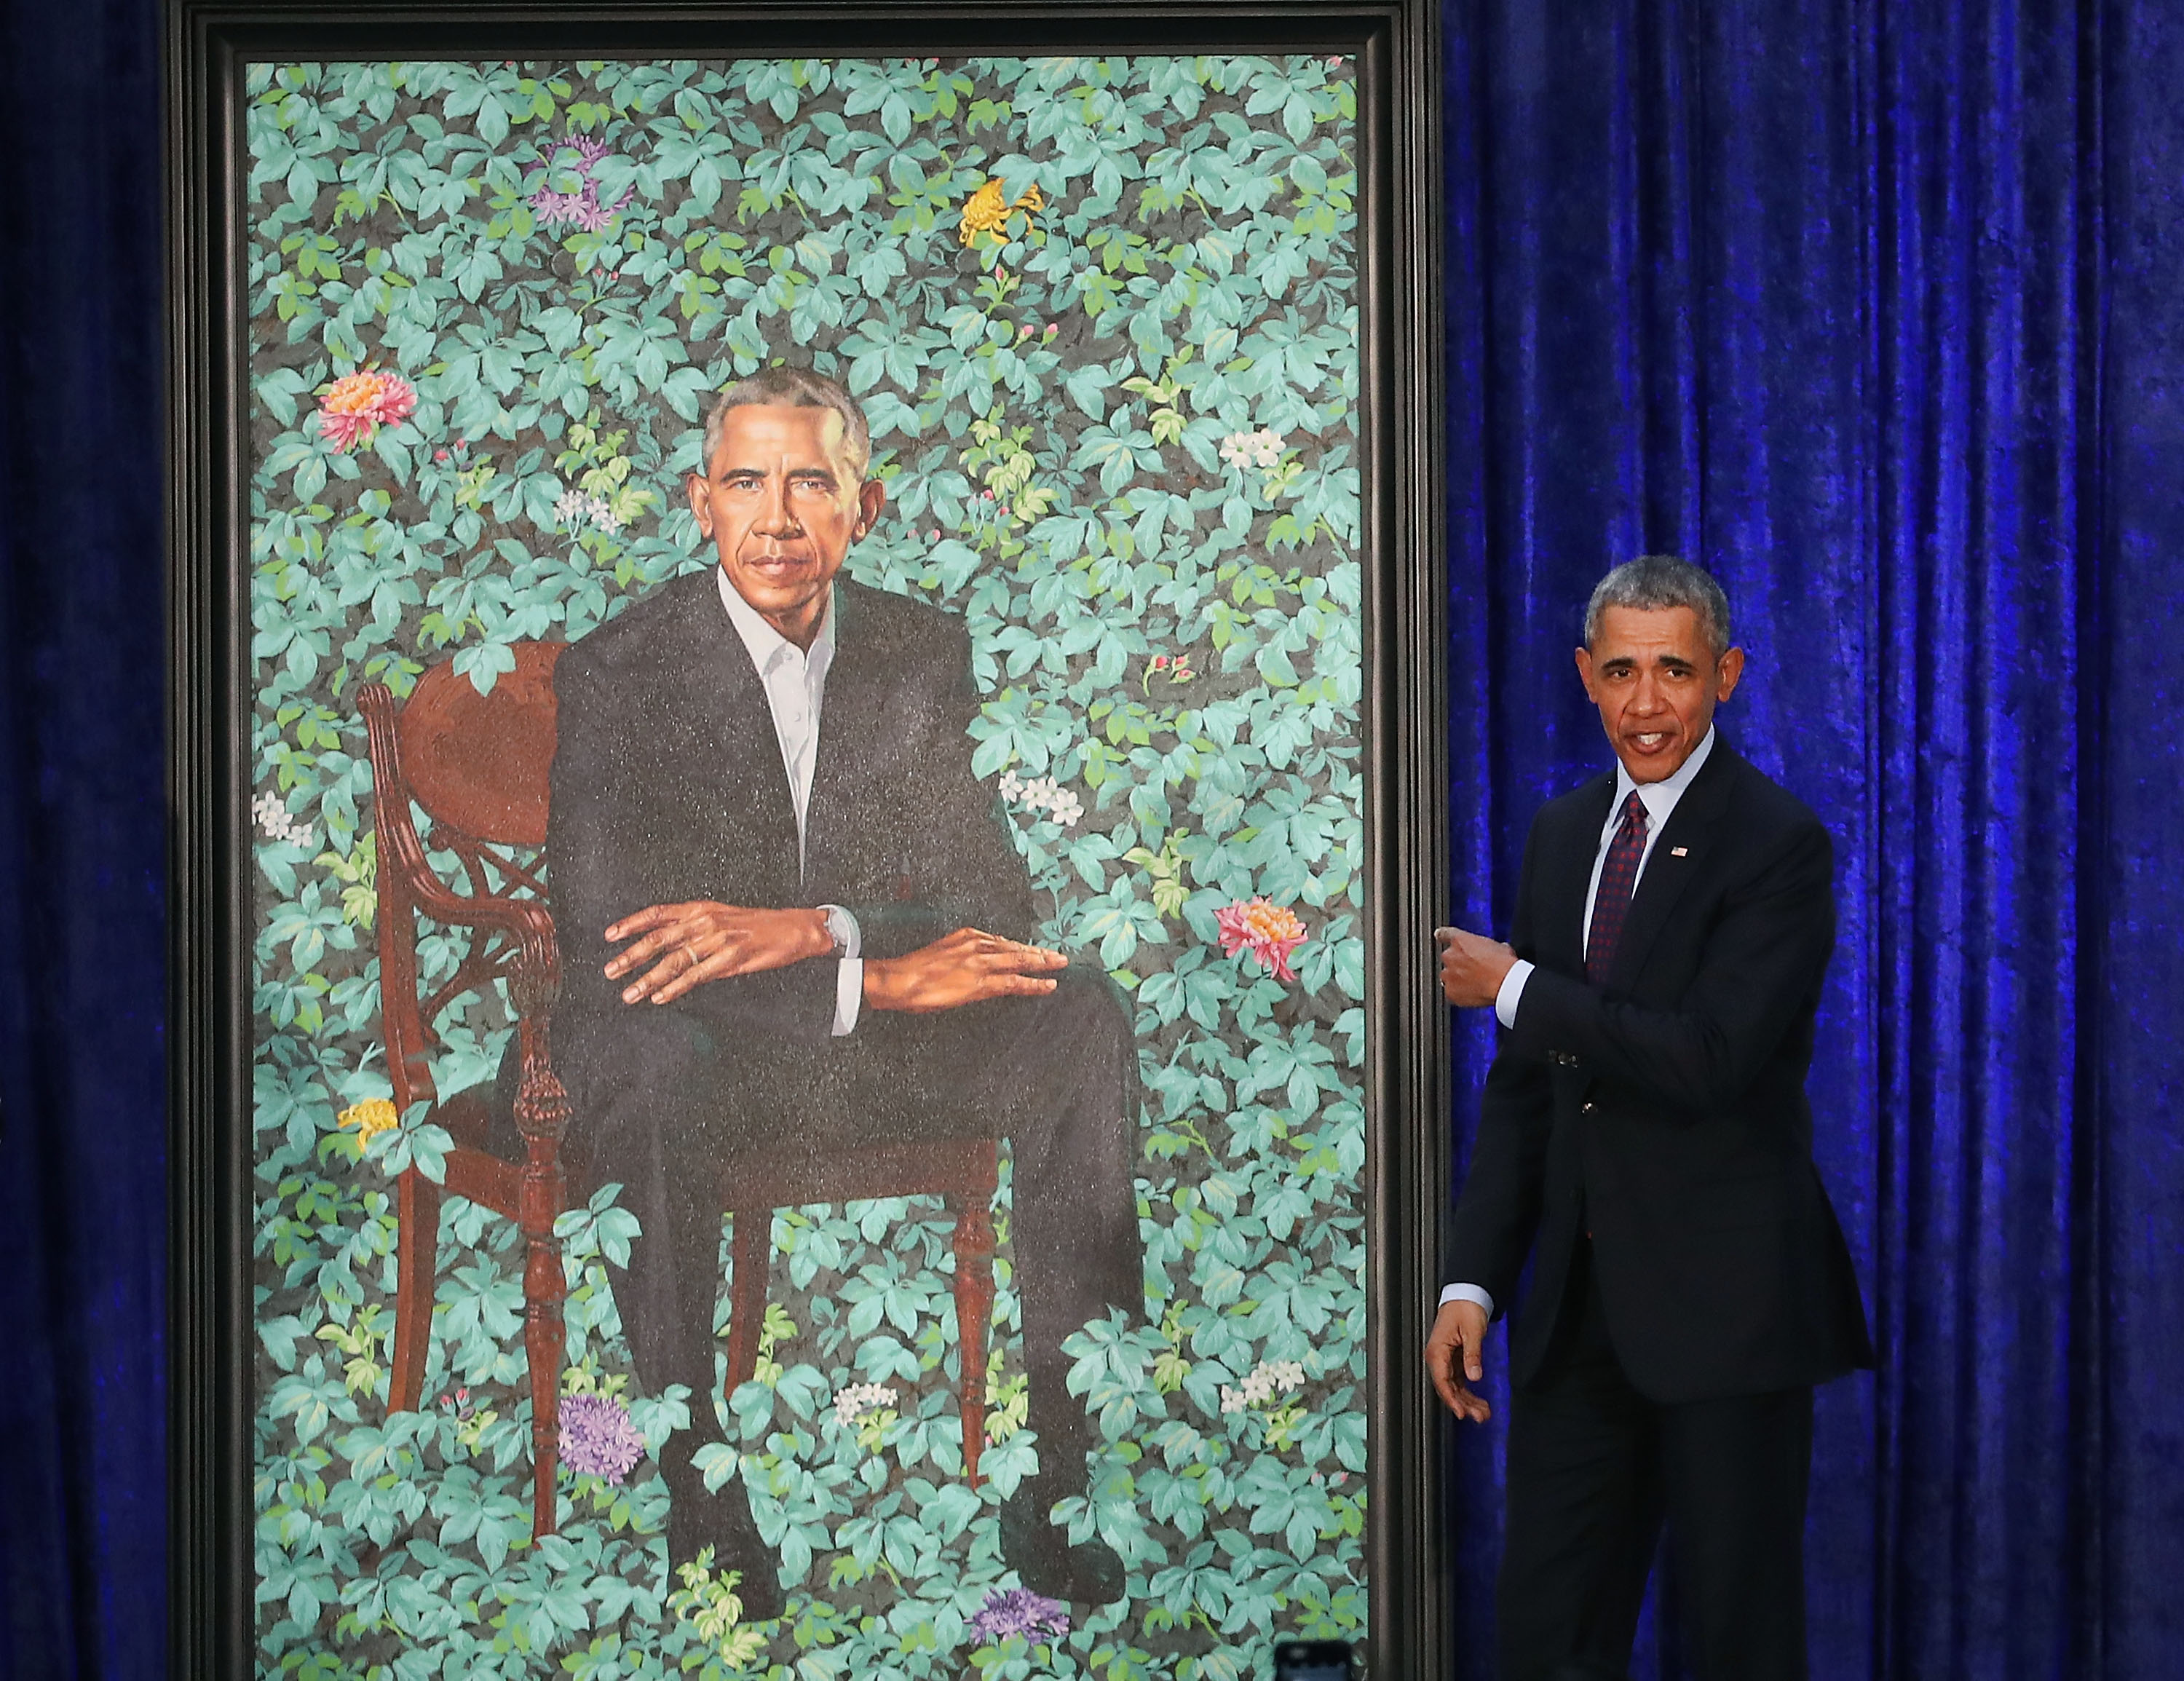 WASHINGTON, DC - FEBRUARY 12: Former U.S. President Barack Obama stands next to his newly unveiled portrait during a ceremony at the Smithsonian's National Portrait Gallery, on February 12, 2018 in Washington, DC. The portraits were commissioned by the Gallery, for Kehinde Wiley to create President Obama's portrait, and Amy Sherald that of Michelle Obama. (Photo by Mark Wilson/Getty Images)